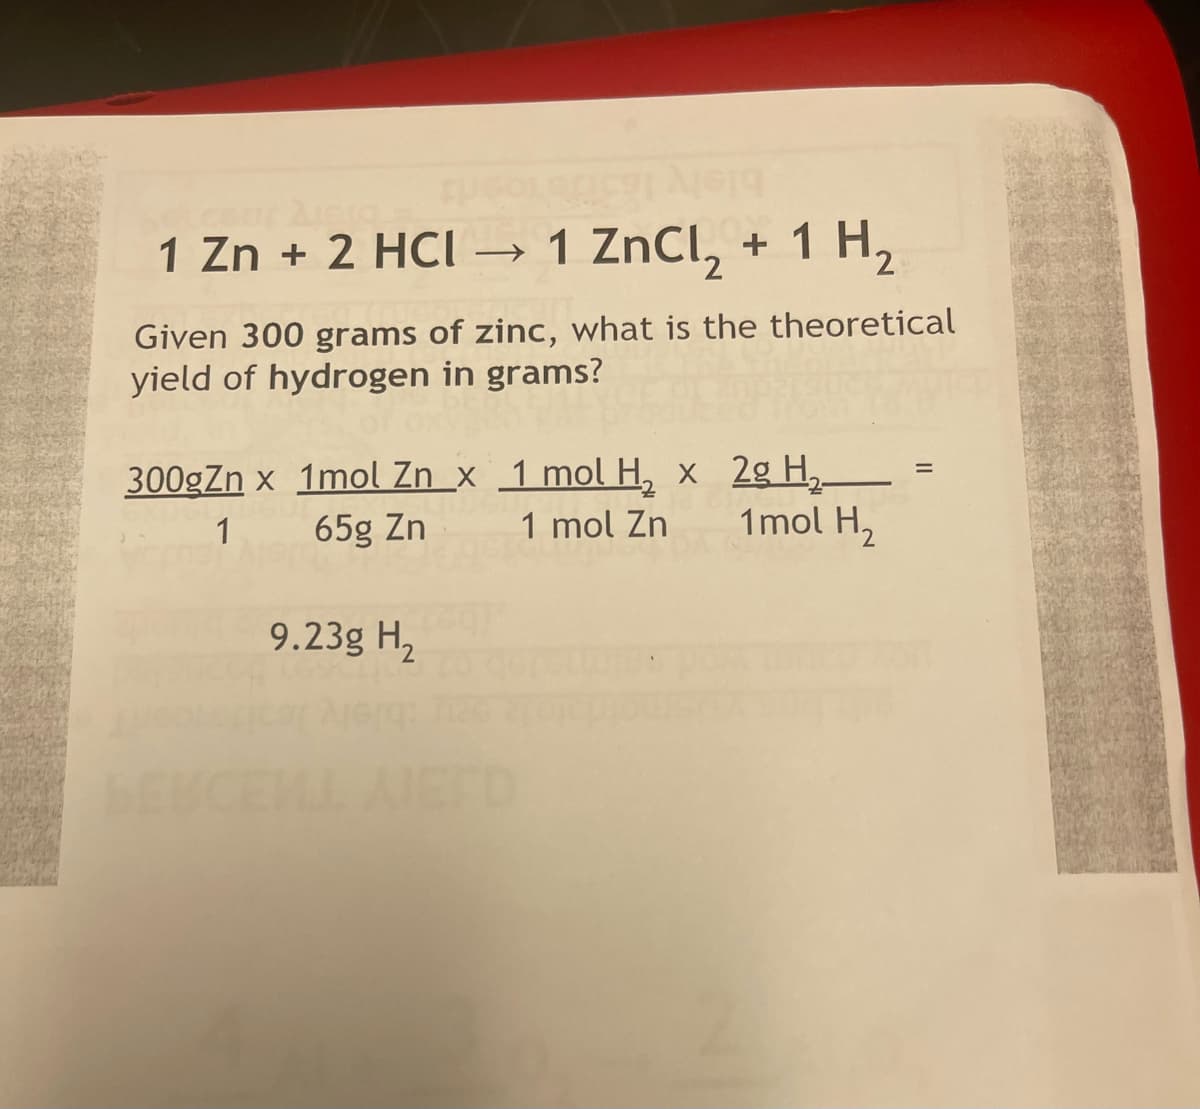 1 Zn + 2 HCI → 1 ZnCl, + 1 H,
Given 300 grams of zinc, what is the theoretical
yield of hydrogen in grams?
300gZn x 1mol Zn _x 1 mol H, x 2g H,
1mol H2
65g Zn
1 mol Zn
9.23g H,
EKCEML AETD
